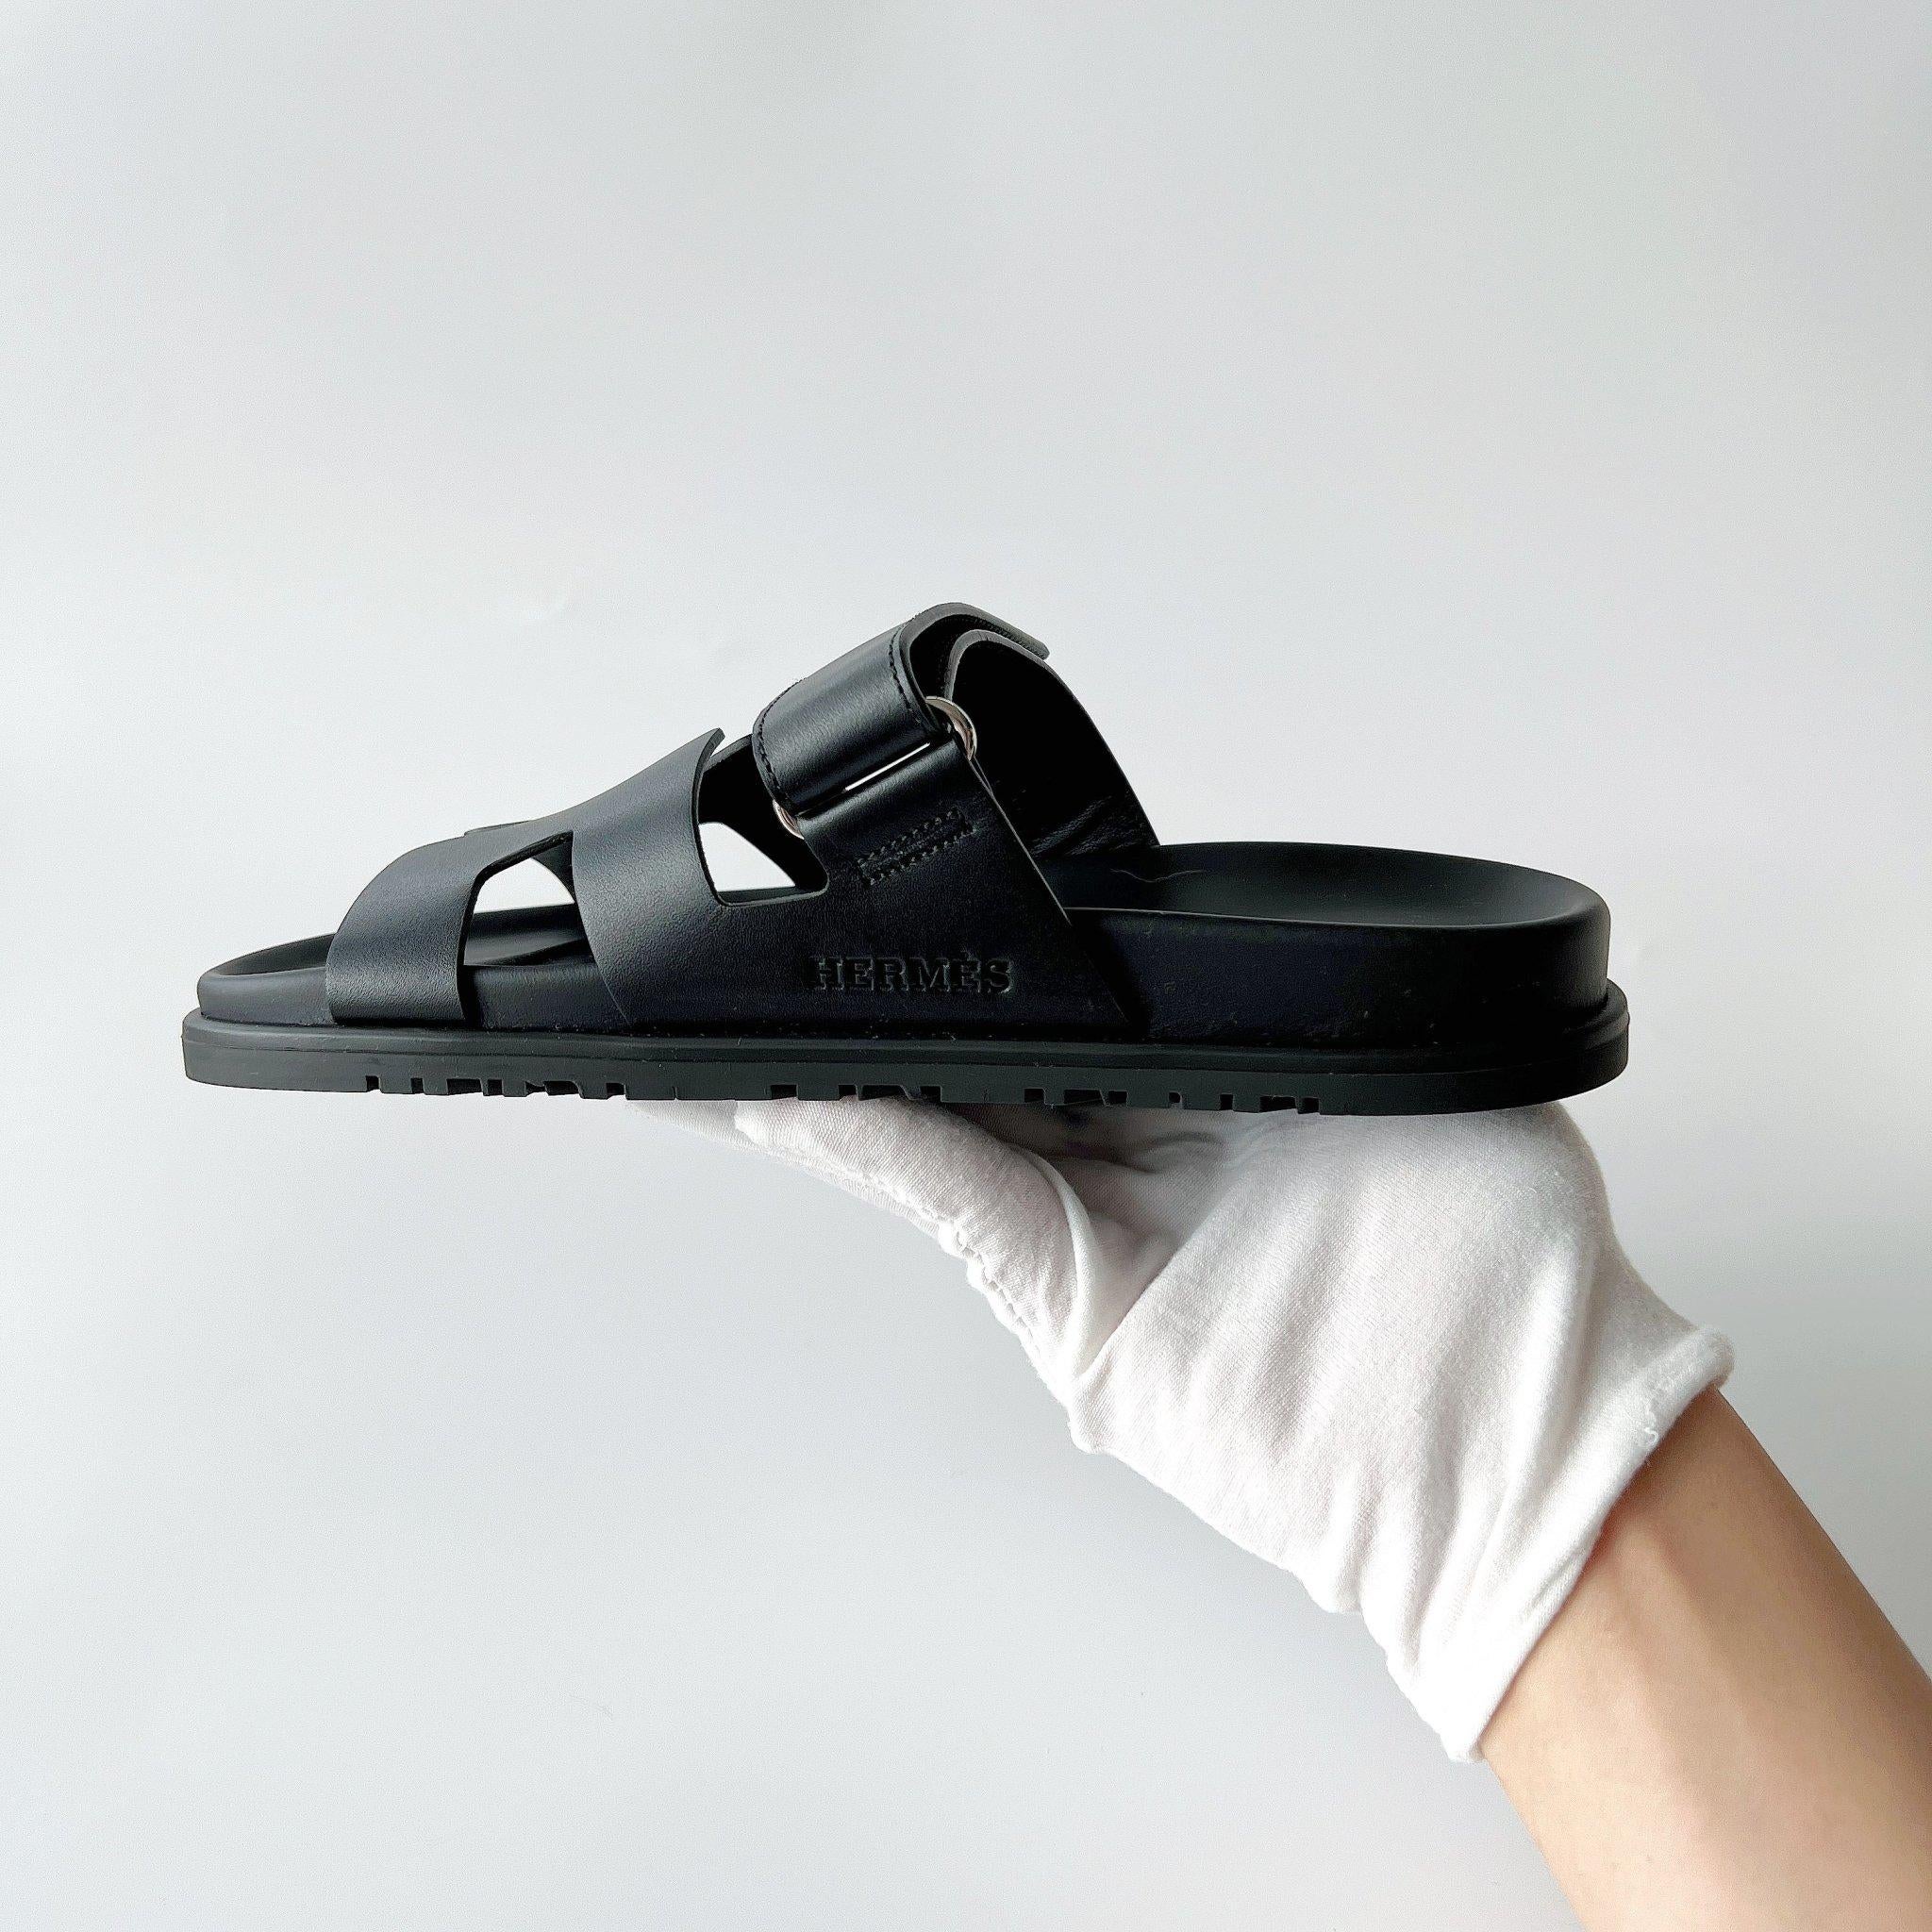 This beautiful pair of All Black Hermès Chypre Sandals. Women's EU 38.5. The sandal is made in Calfskin with a rubber sole. Brand new and unworn. With receipt, box and dust bags. 

Brand: Hermès
Colour: Black
Material: Leather 
Size: 38.5
Condition